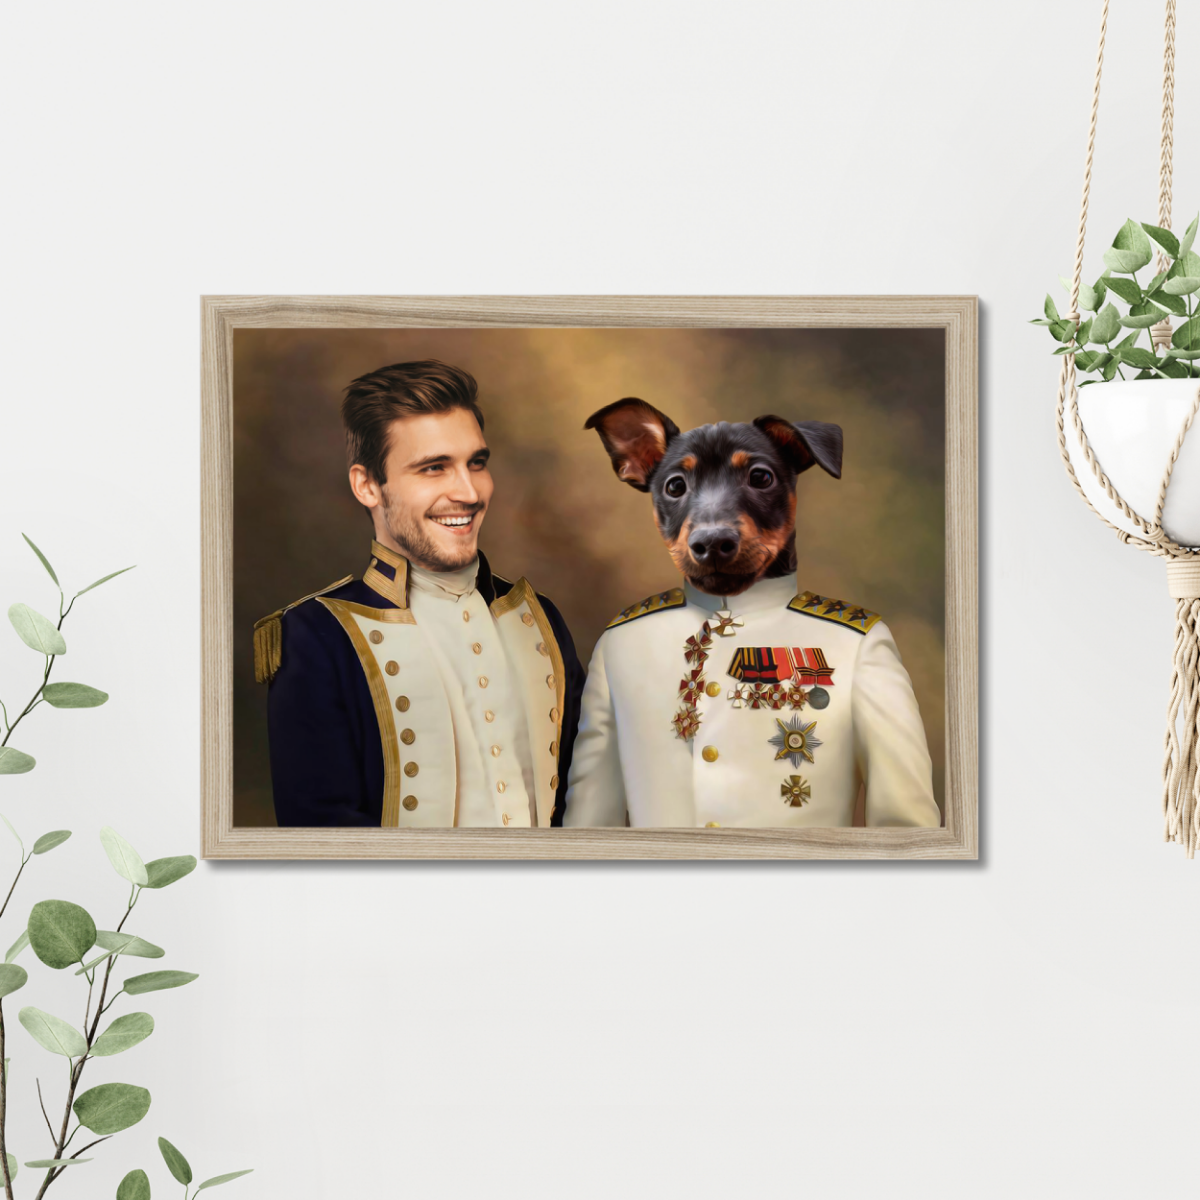 Paw & Glory, paw and glory, small dog portrait, best dog paintings, custom pet portraits, the general portrait, custom pet portraits south africa, nasa dog portrait, pet portrait